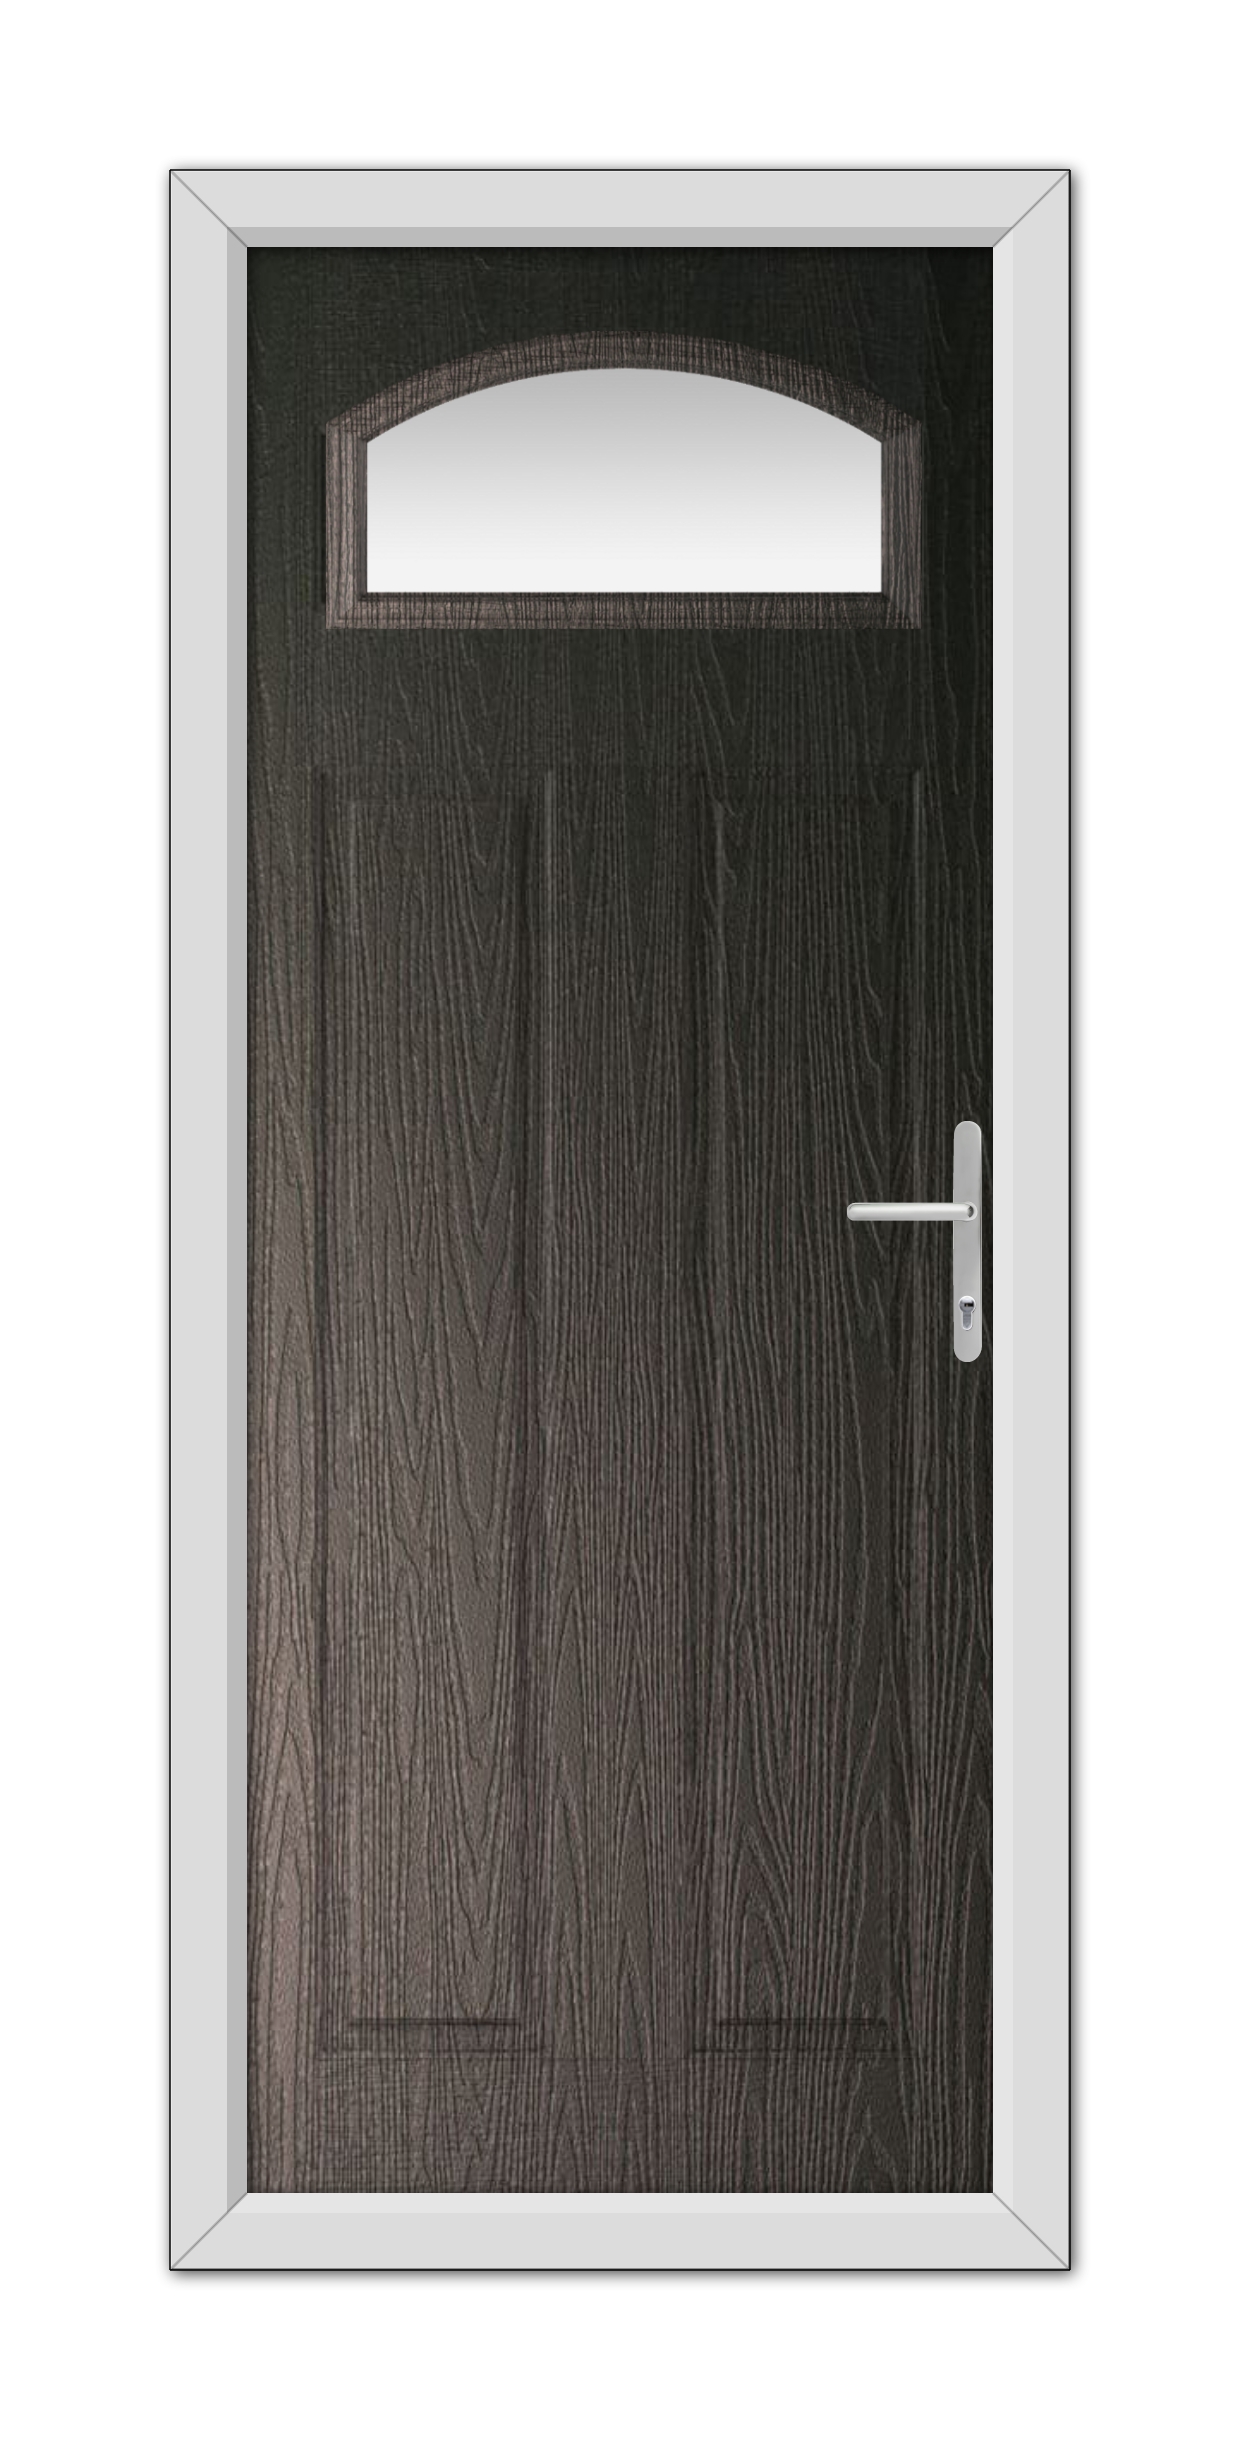 A Schwarzbraun Harlington Composite Door 48mm Timber Core with a rectangular frosted glass window at the top, framed in white, with a silver handle on the right side.